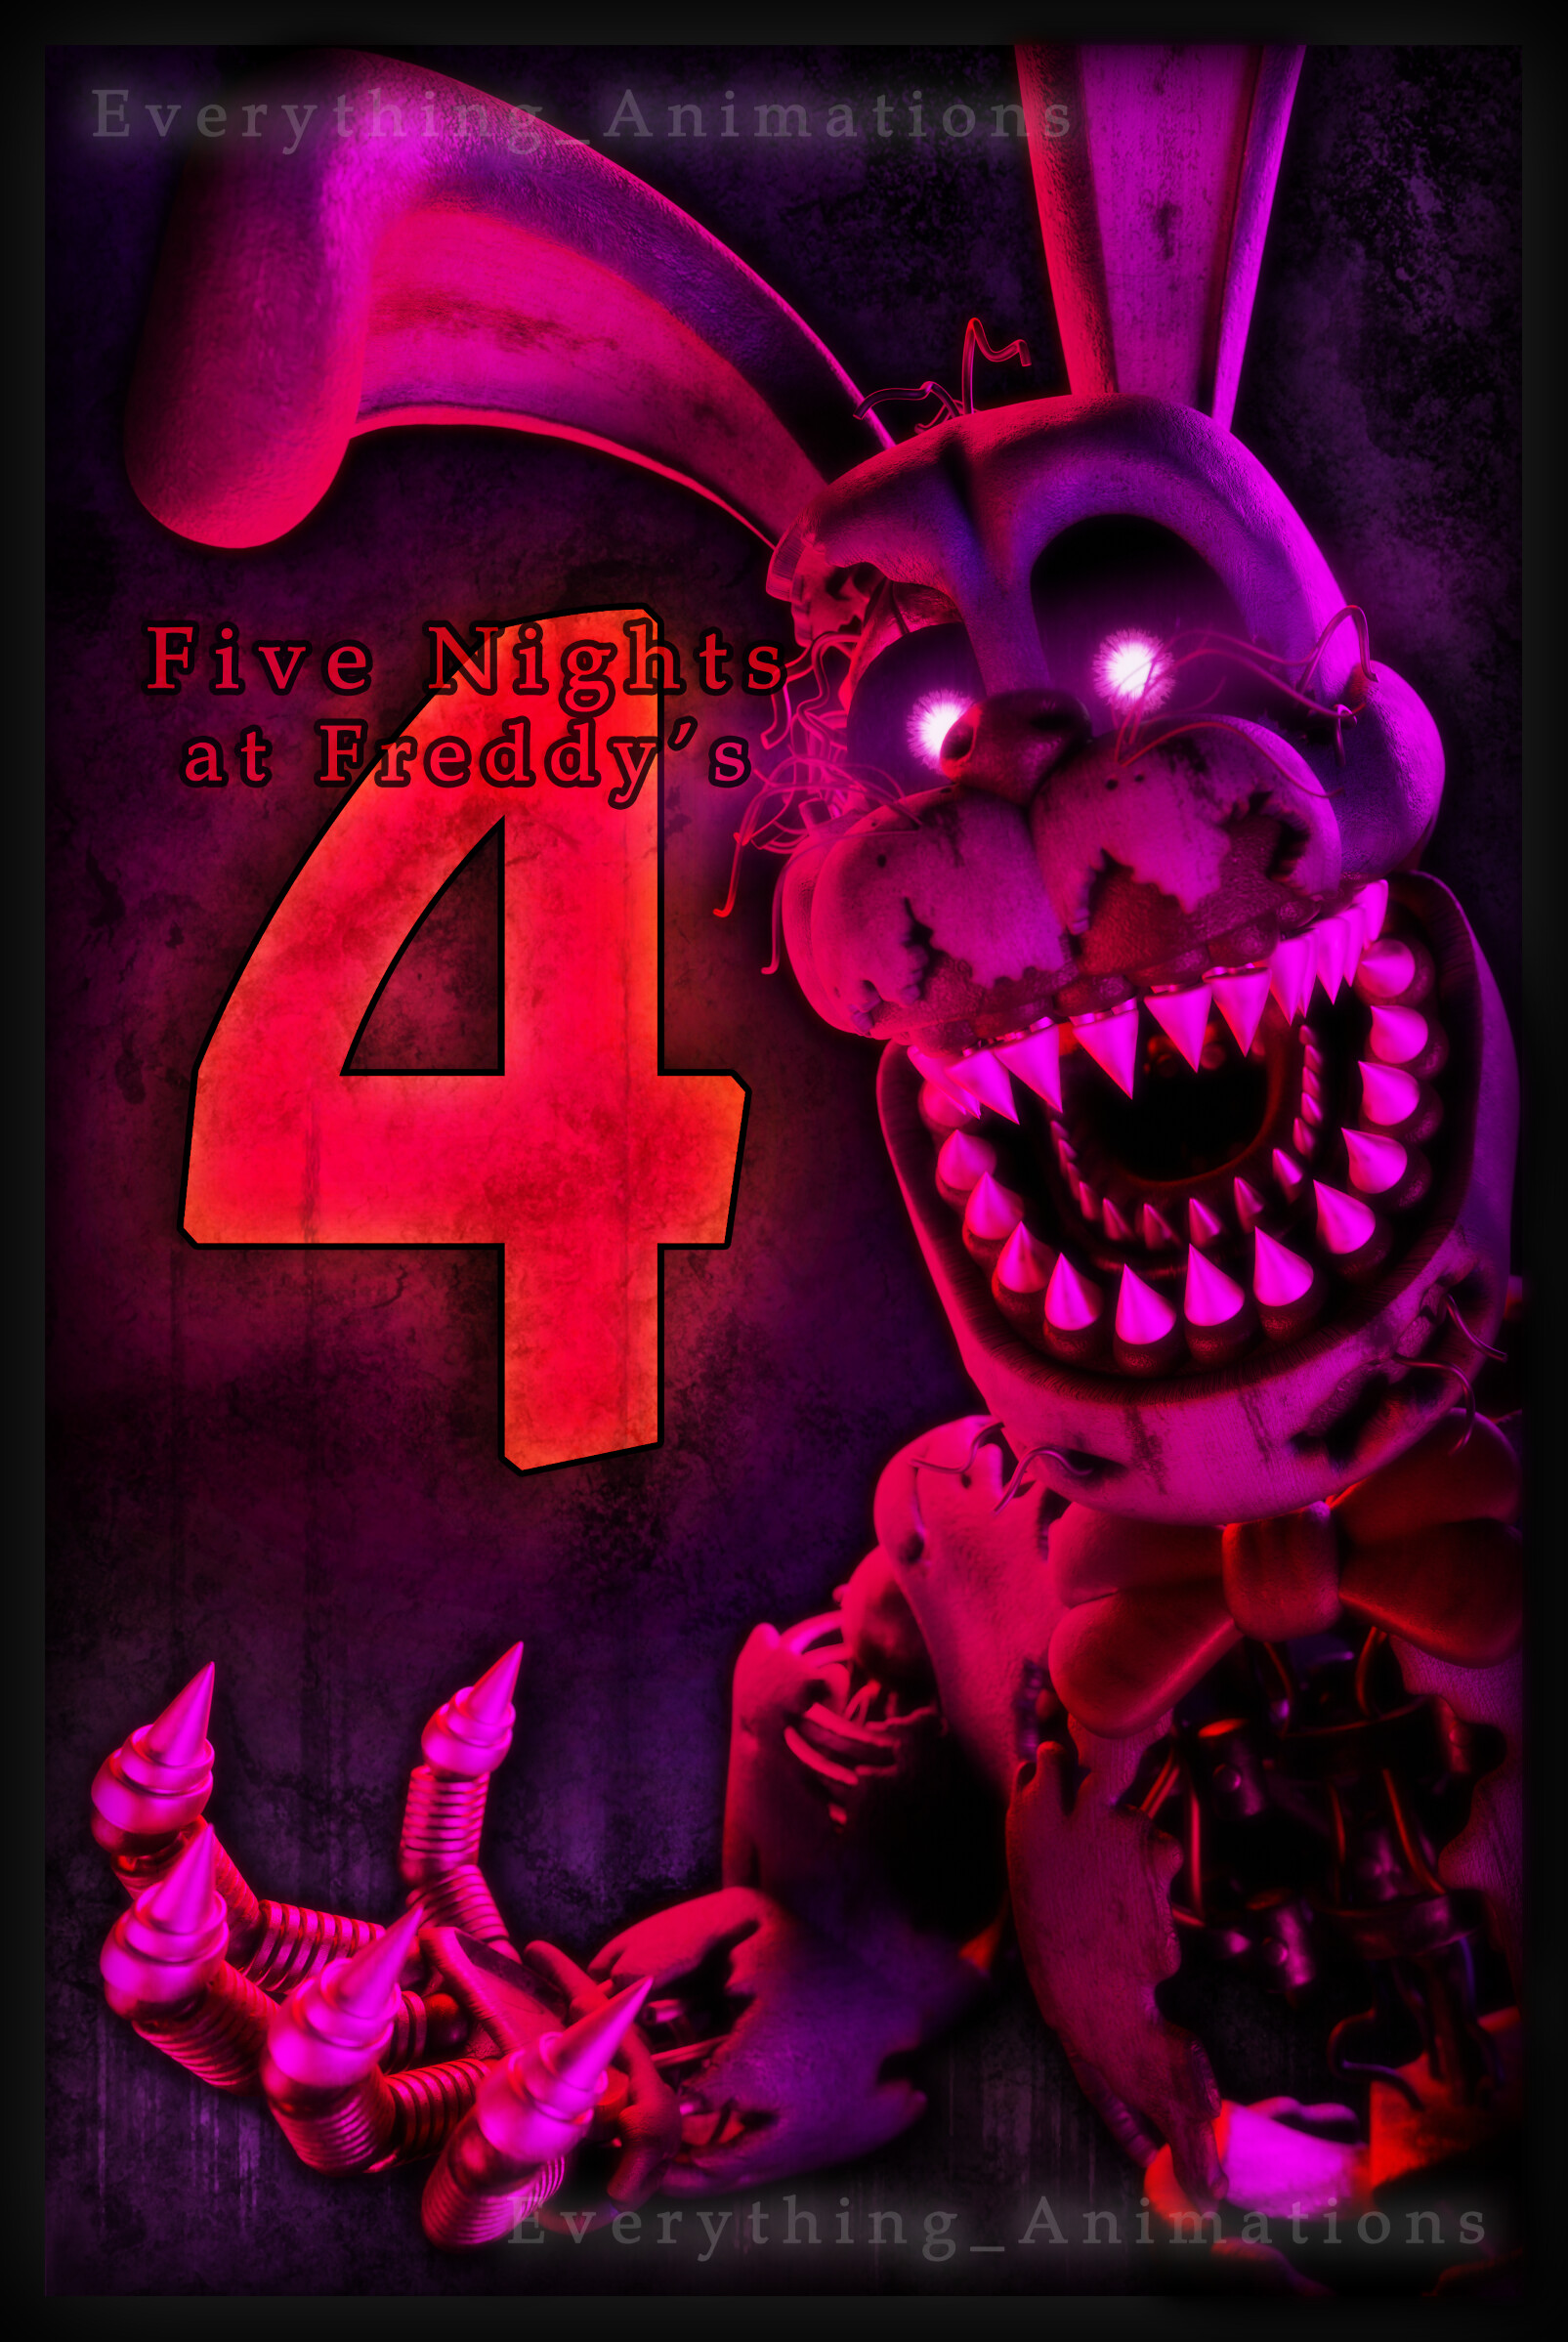 Five Nights at Freddy's - FNAF 4 - Nightmare Freddy Poster for